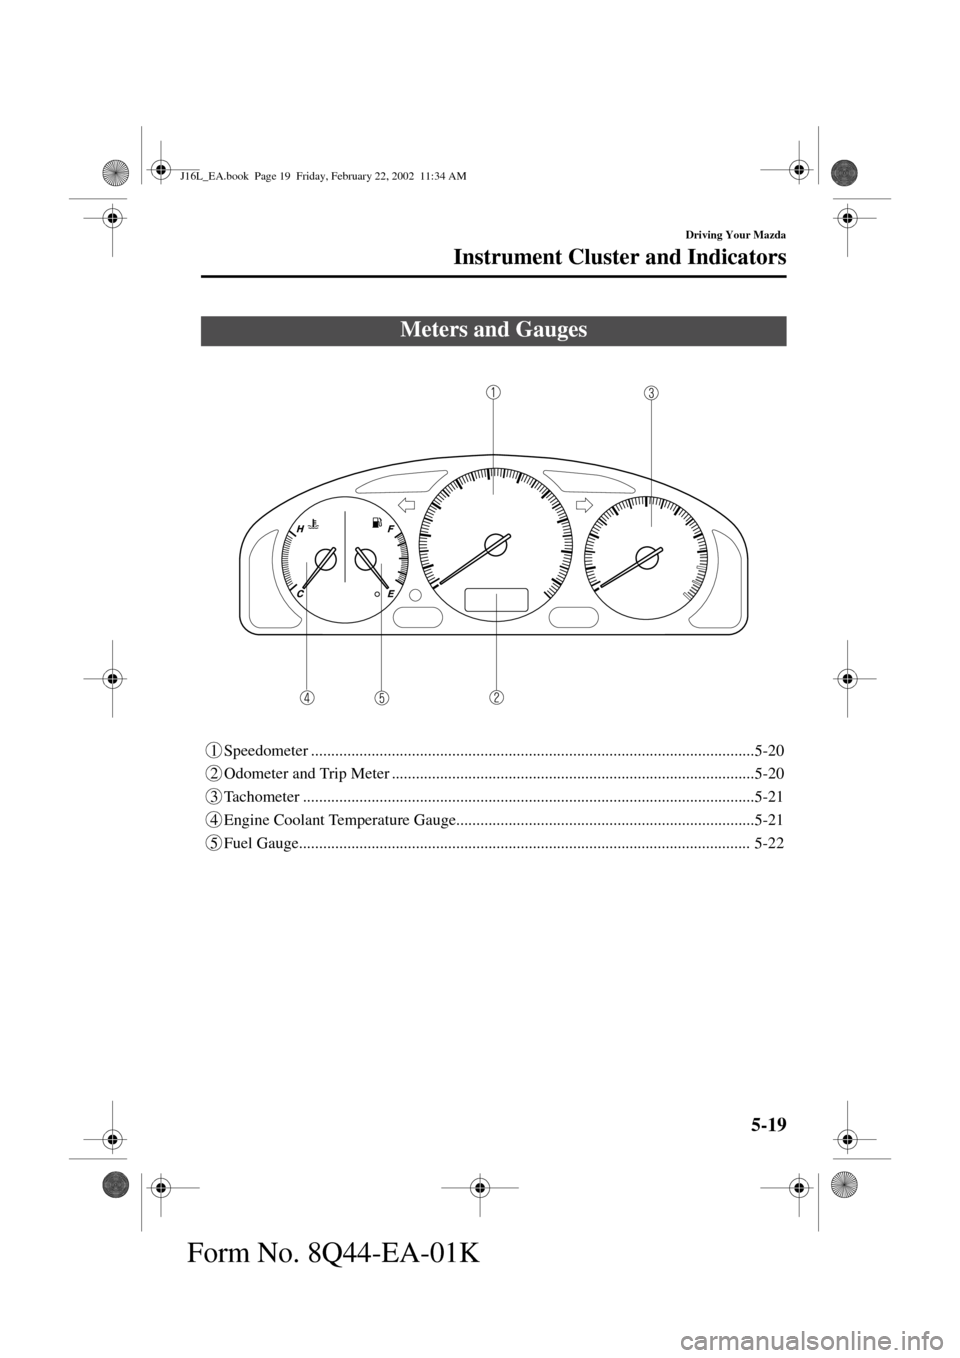 MAZDA MODEL MPV 2002  Owners Manual (in English) 5-19
Driving Your Mazda
Form No. 8Q44-EA-01K
Instrument Cluster and Indicators
1 Speedometer ...........................................................................................................